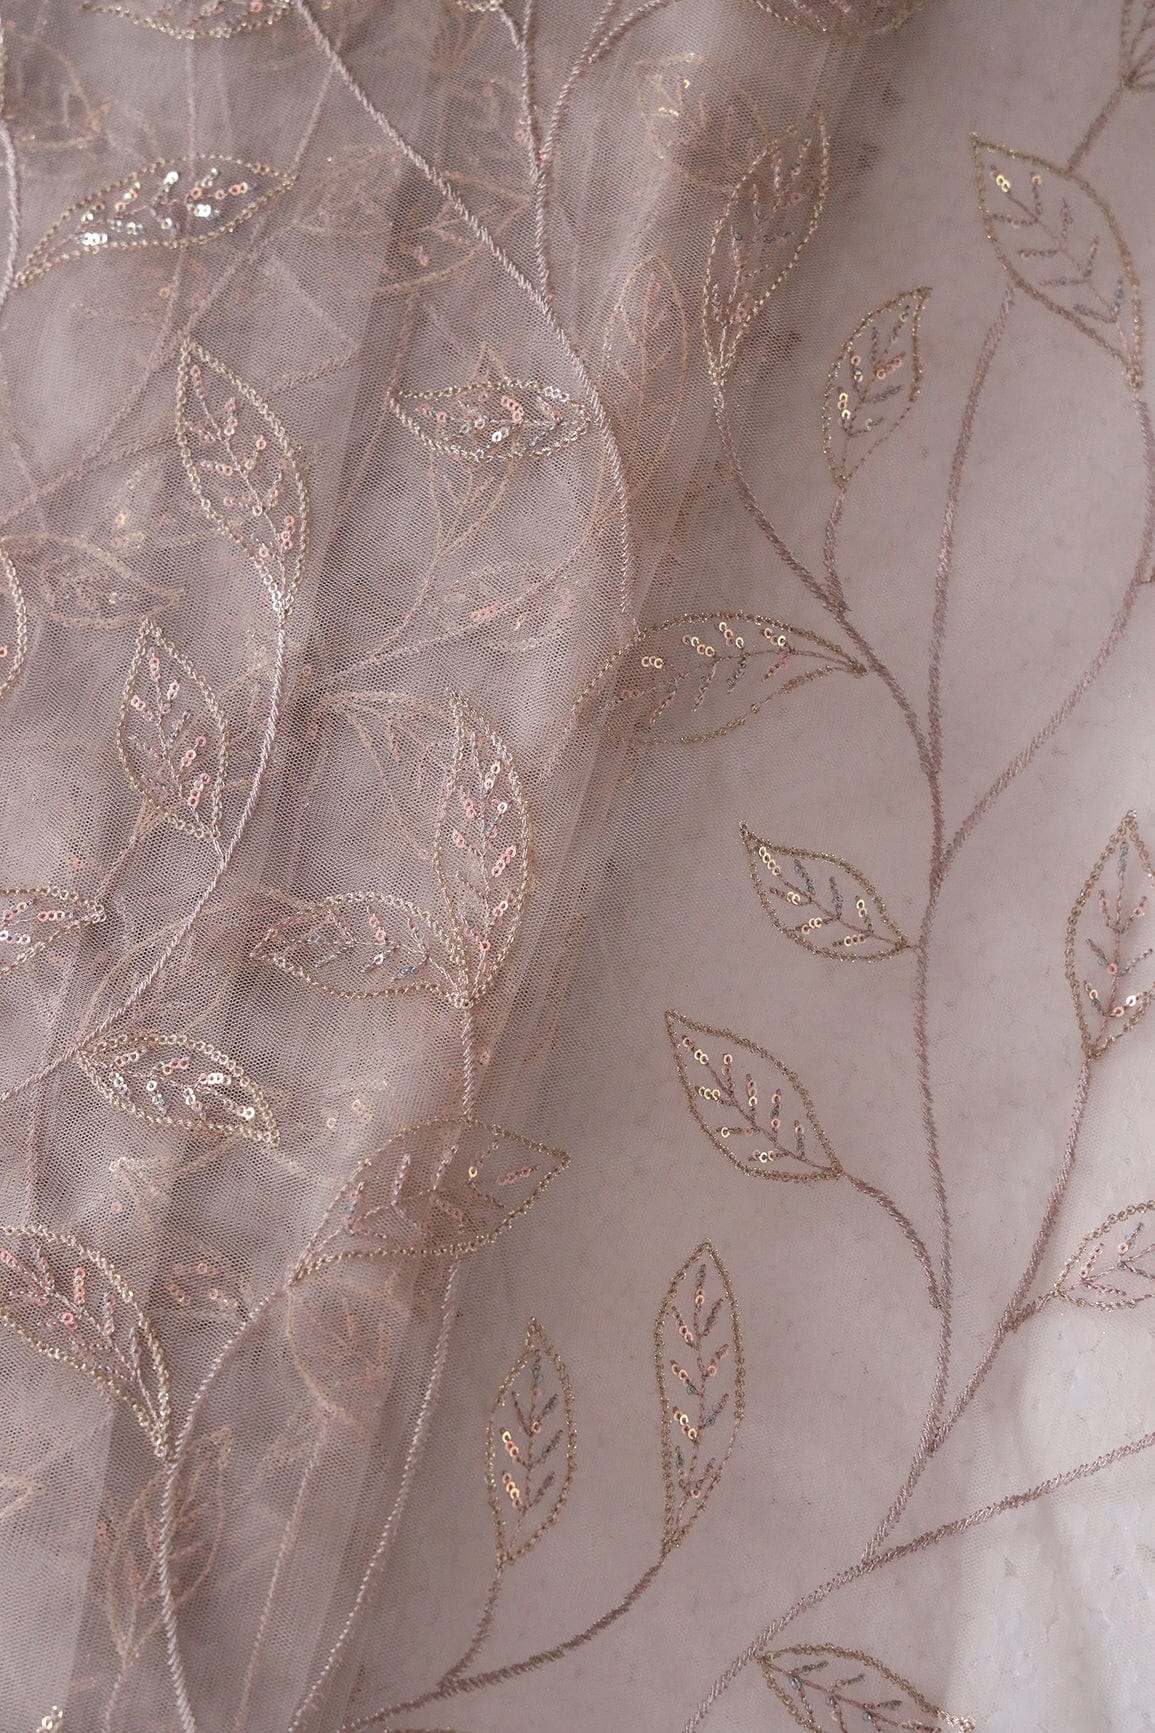 doeraa Embroidery Fabrics 3 Meter Cut Piece Of Grey Thread With Sequins Beautiful Leafy Embroidery On Grey Soft Net Fabric